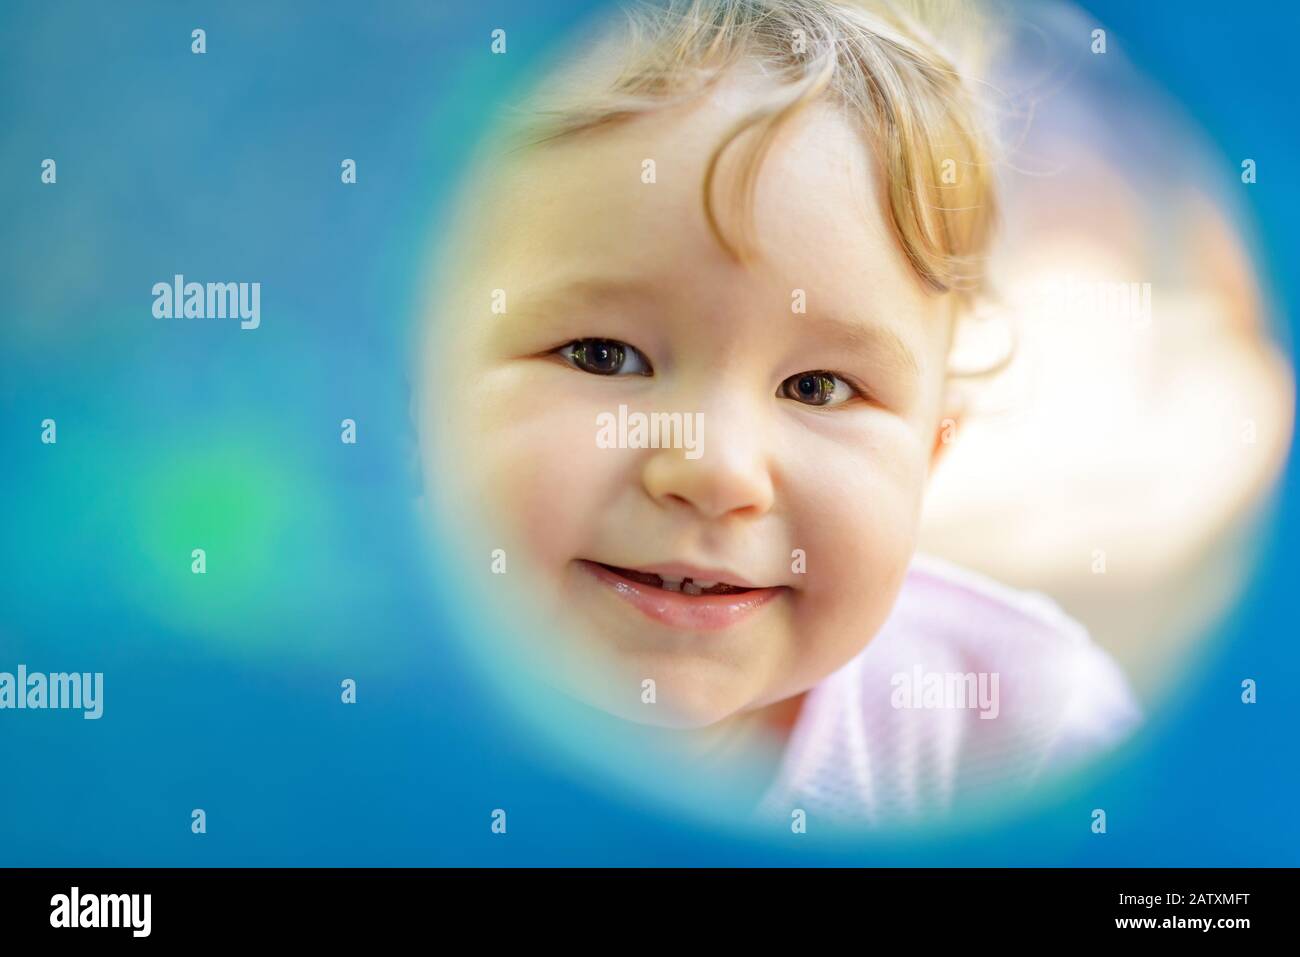 The one-year child plays on the playground. Cute baby girl looks through a round window to the camera. Stock Photo